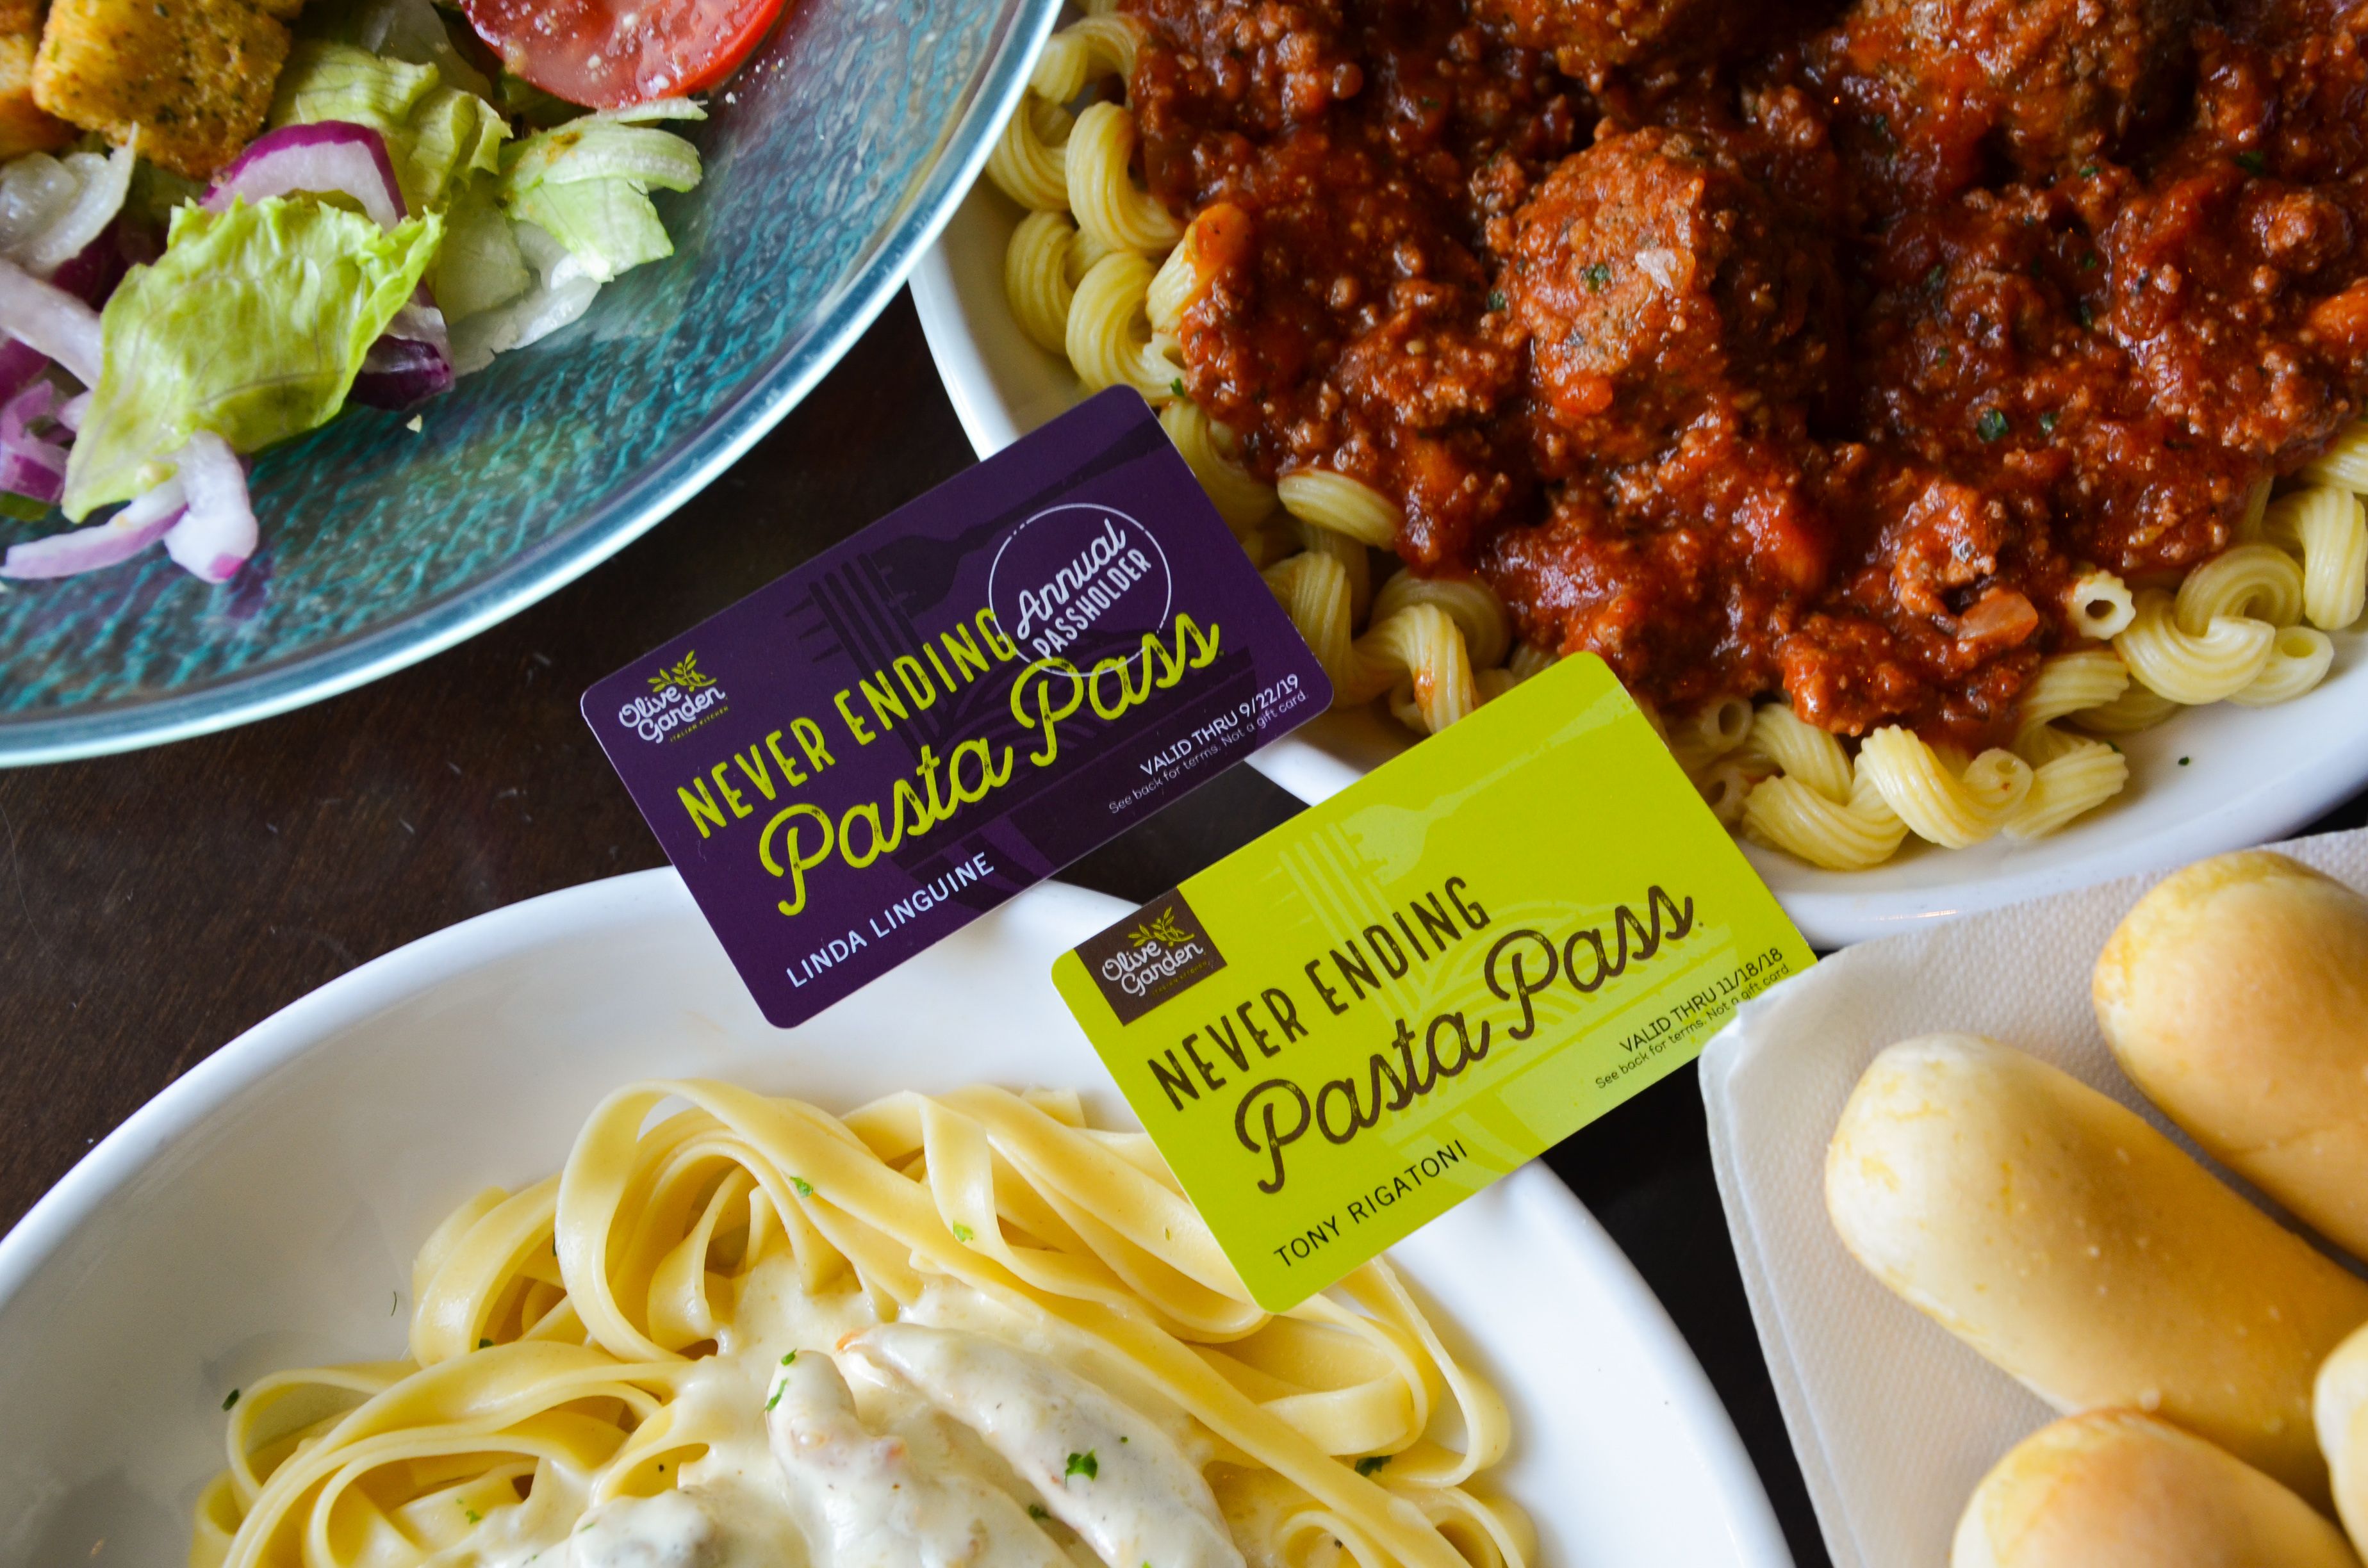 Olive Garden Is Giving Out 10 More Yearlong Pasta Passes Olive